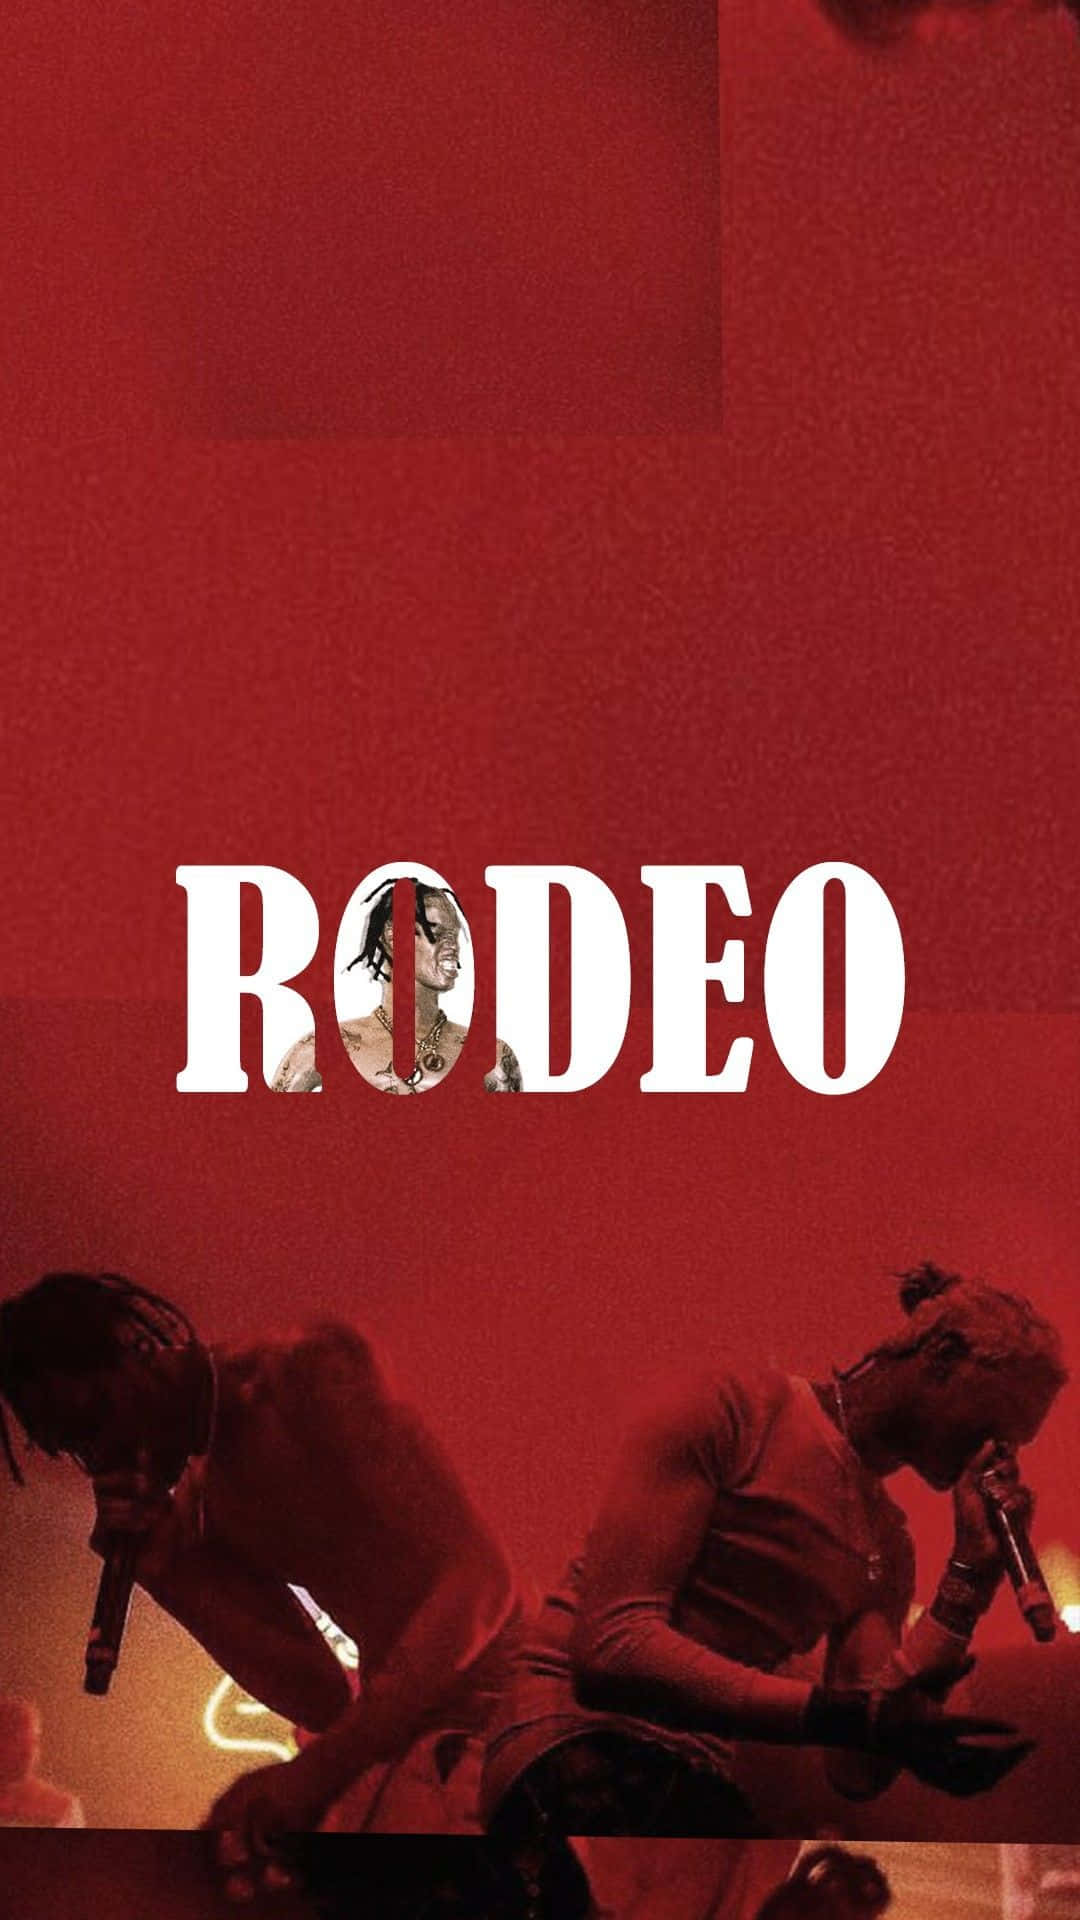 Rodeo - A Cover Of A Song Wallpaper